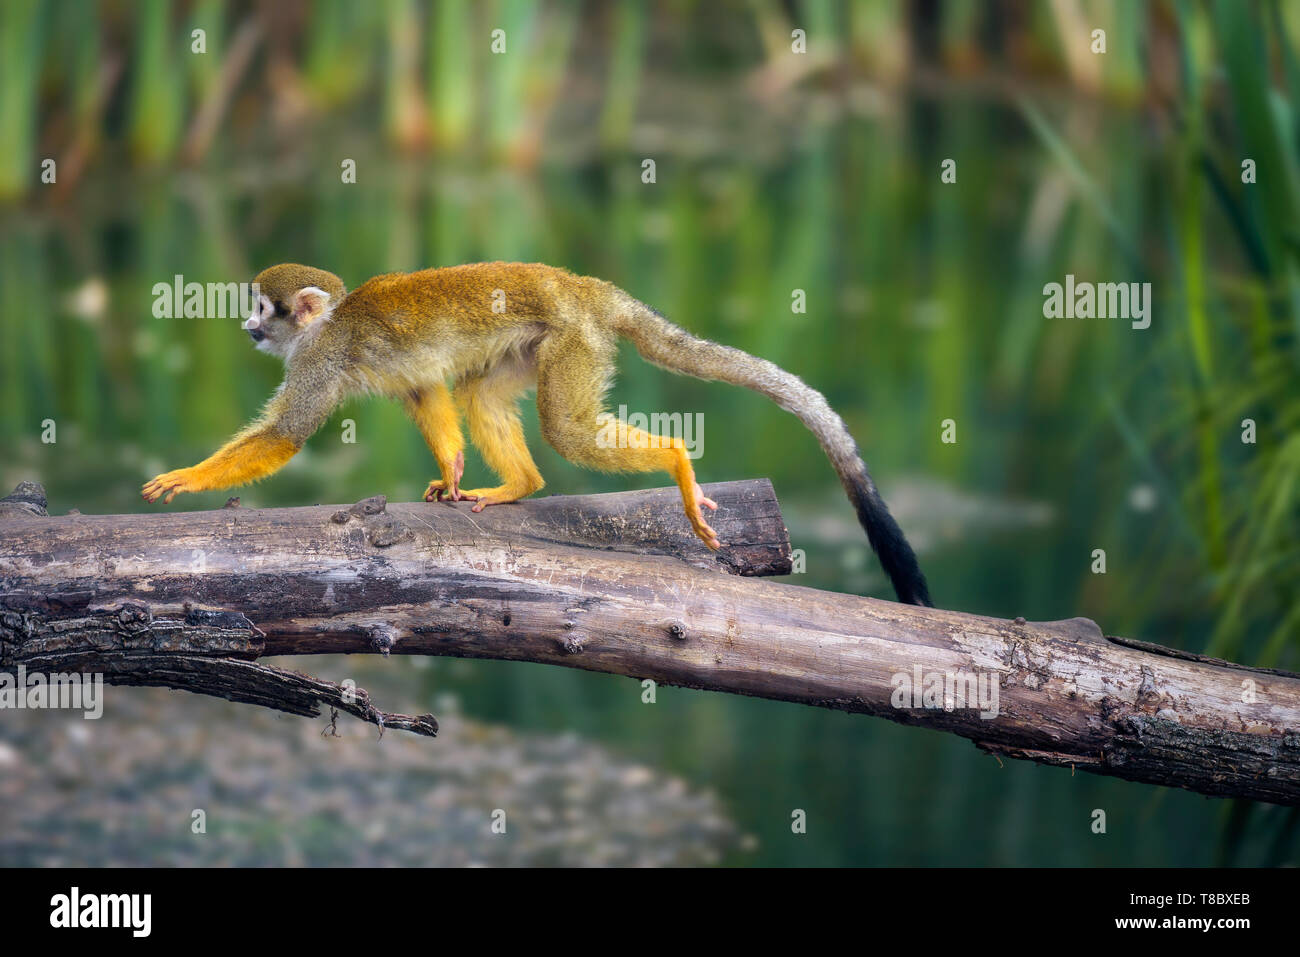 Common squirrel monkey walking on a tree branch above water Stock Photo